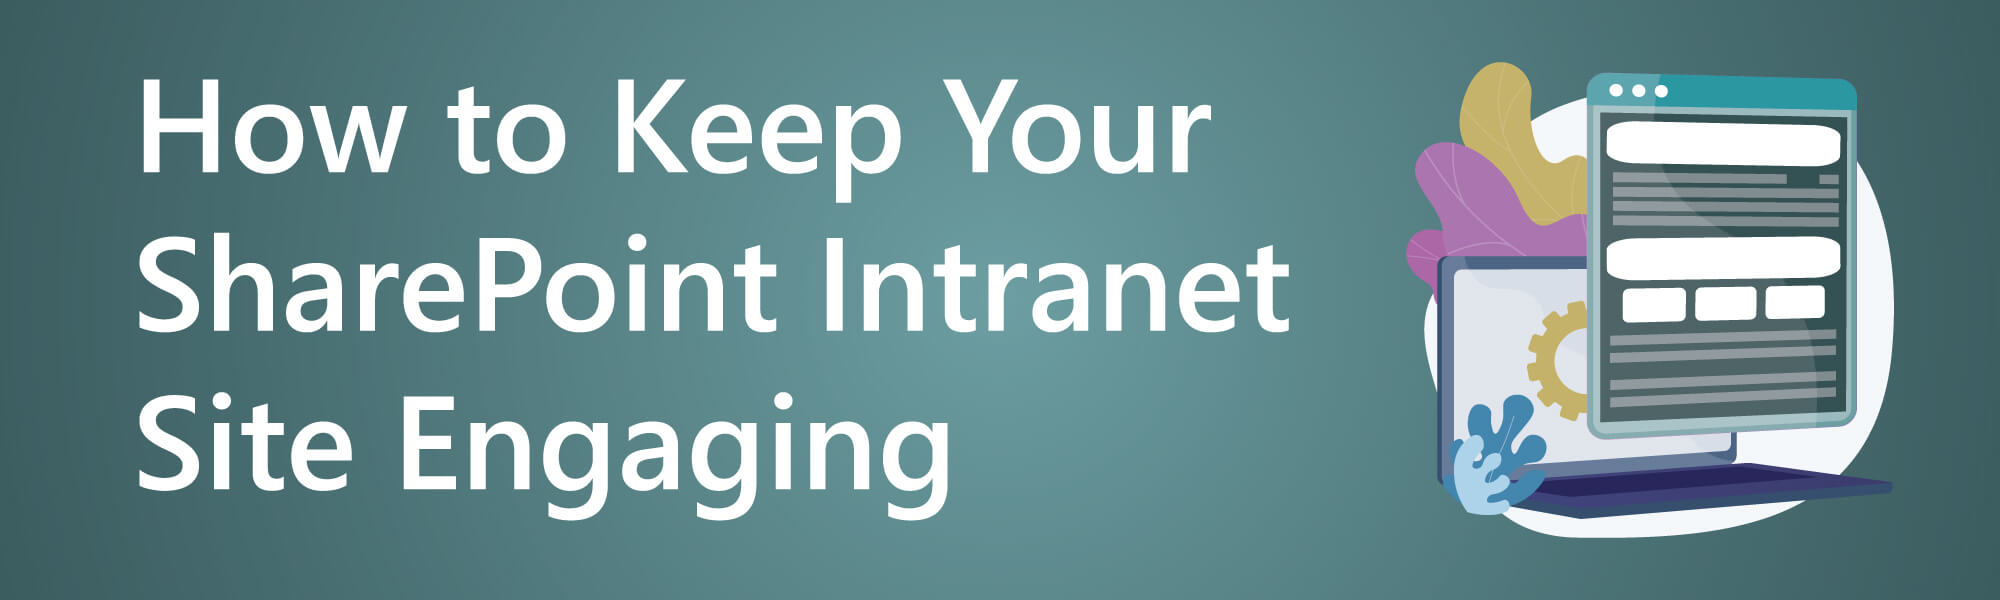 How-to-Keep-Your-SharePoint-Intranet-Engaging-Banner